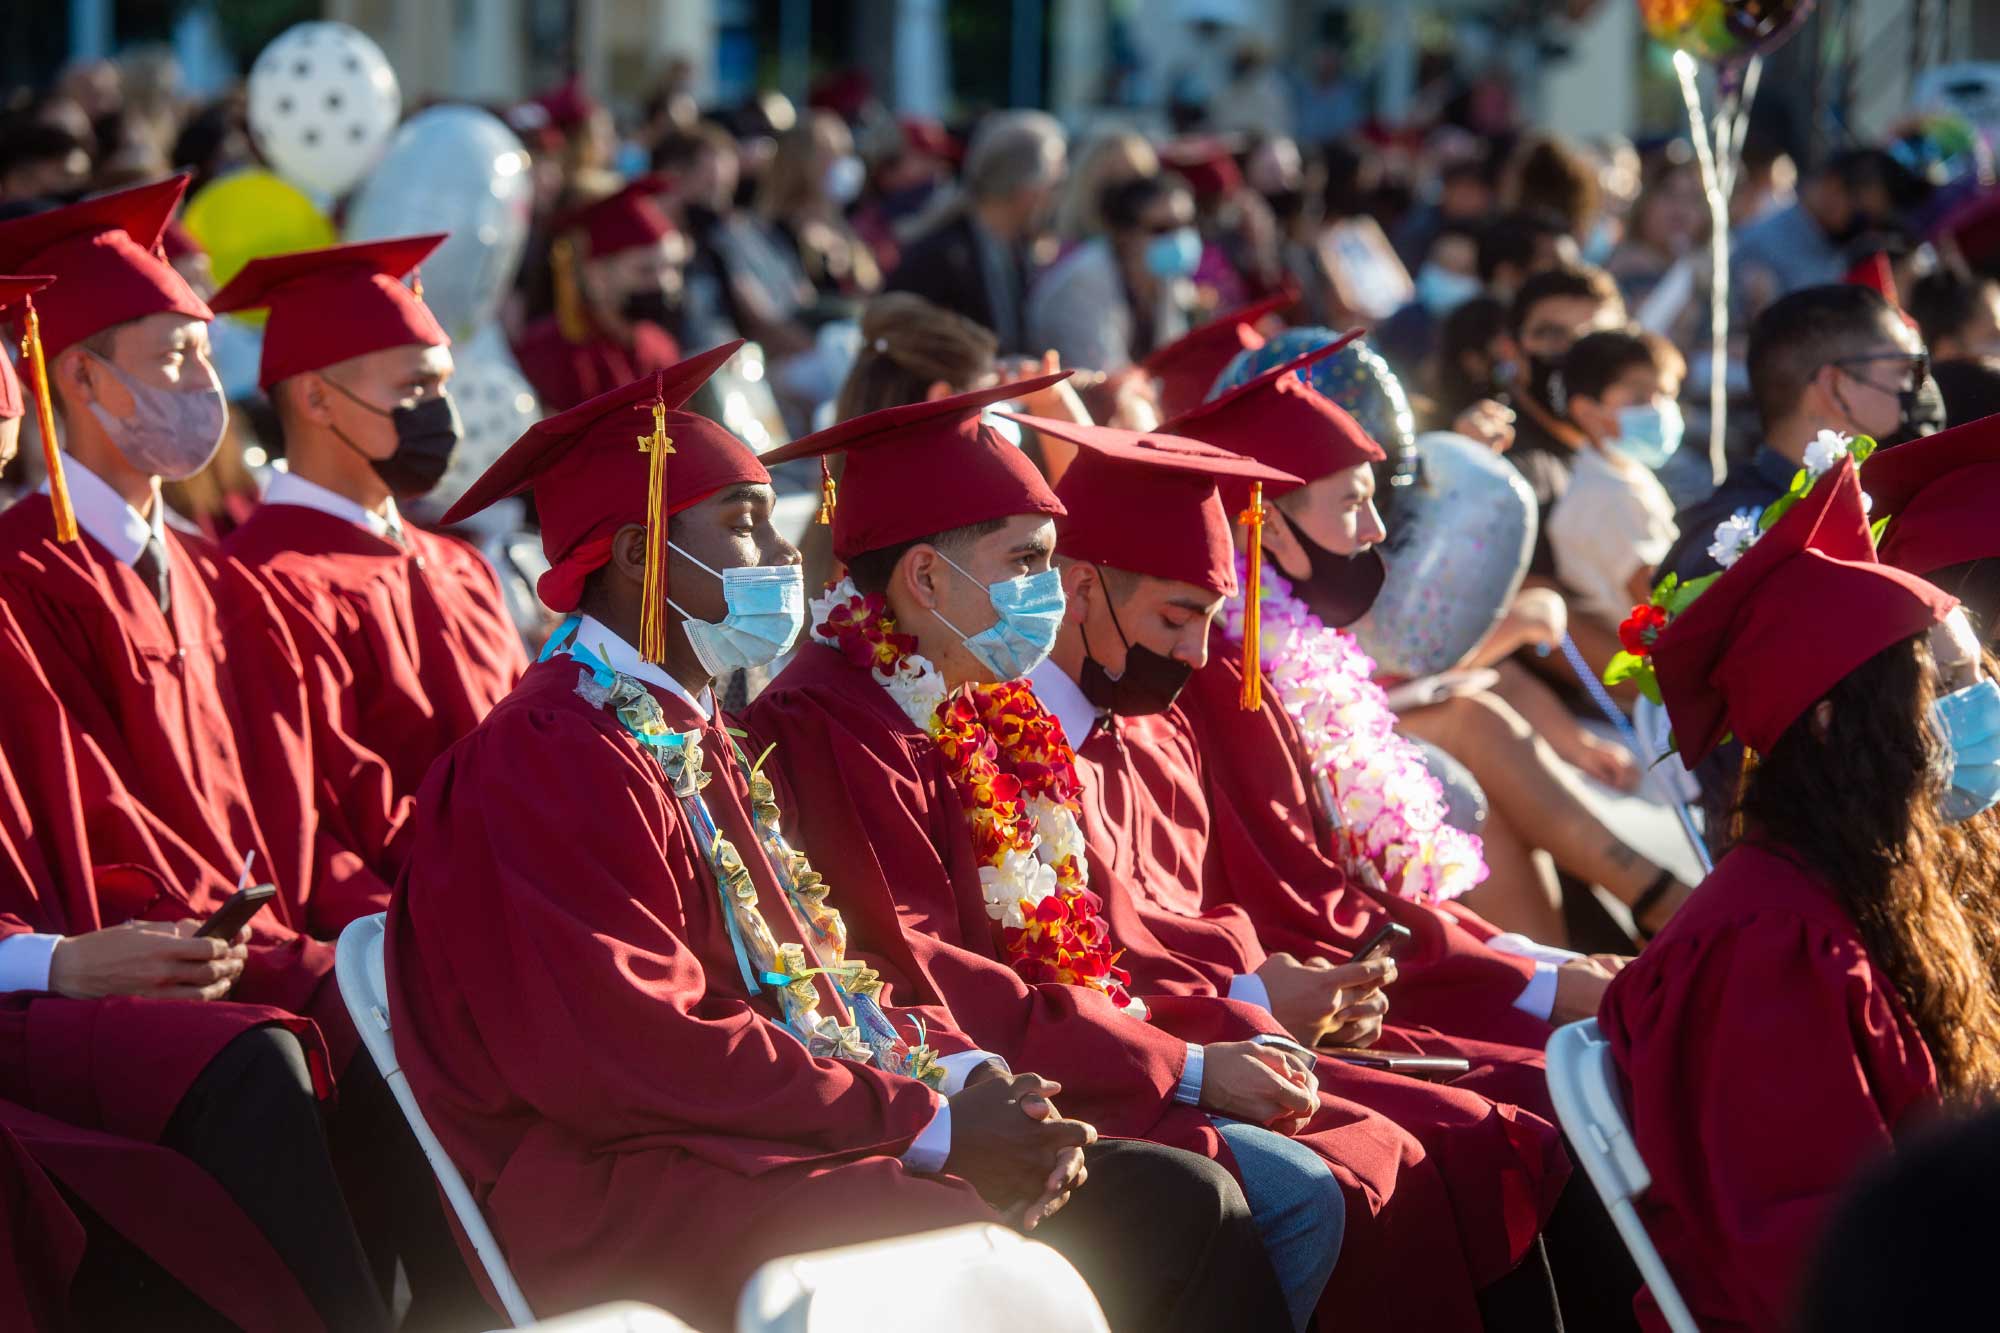 CCPA Students sitting at their graduation ceremony wearing Academic Regalia